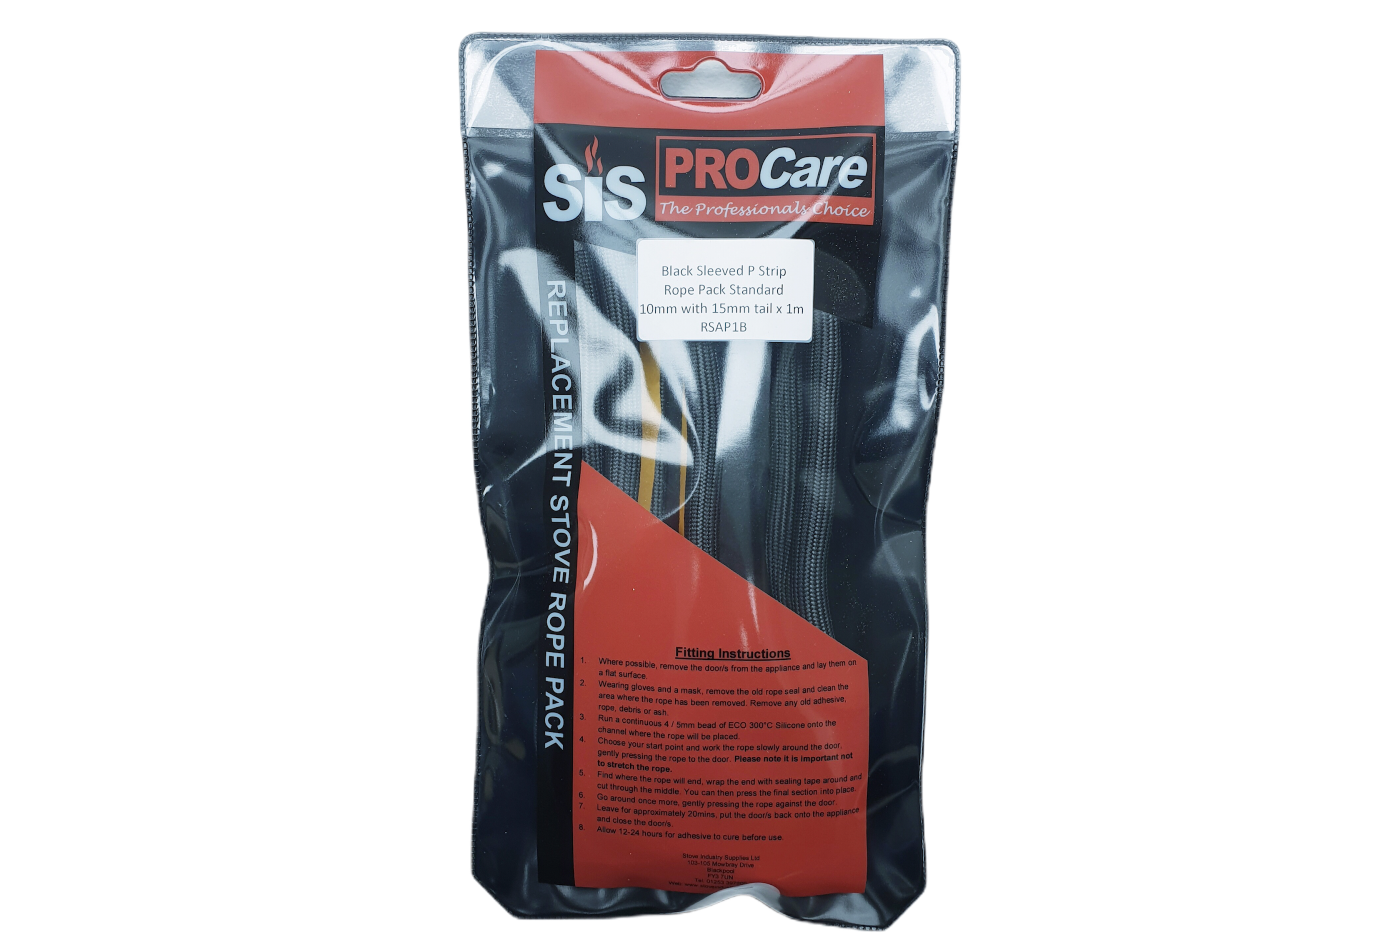 SiS Procare  10 milimetre with 15 milimetre tail x 1M P Strip Stove Rope Pack